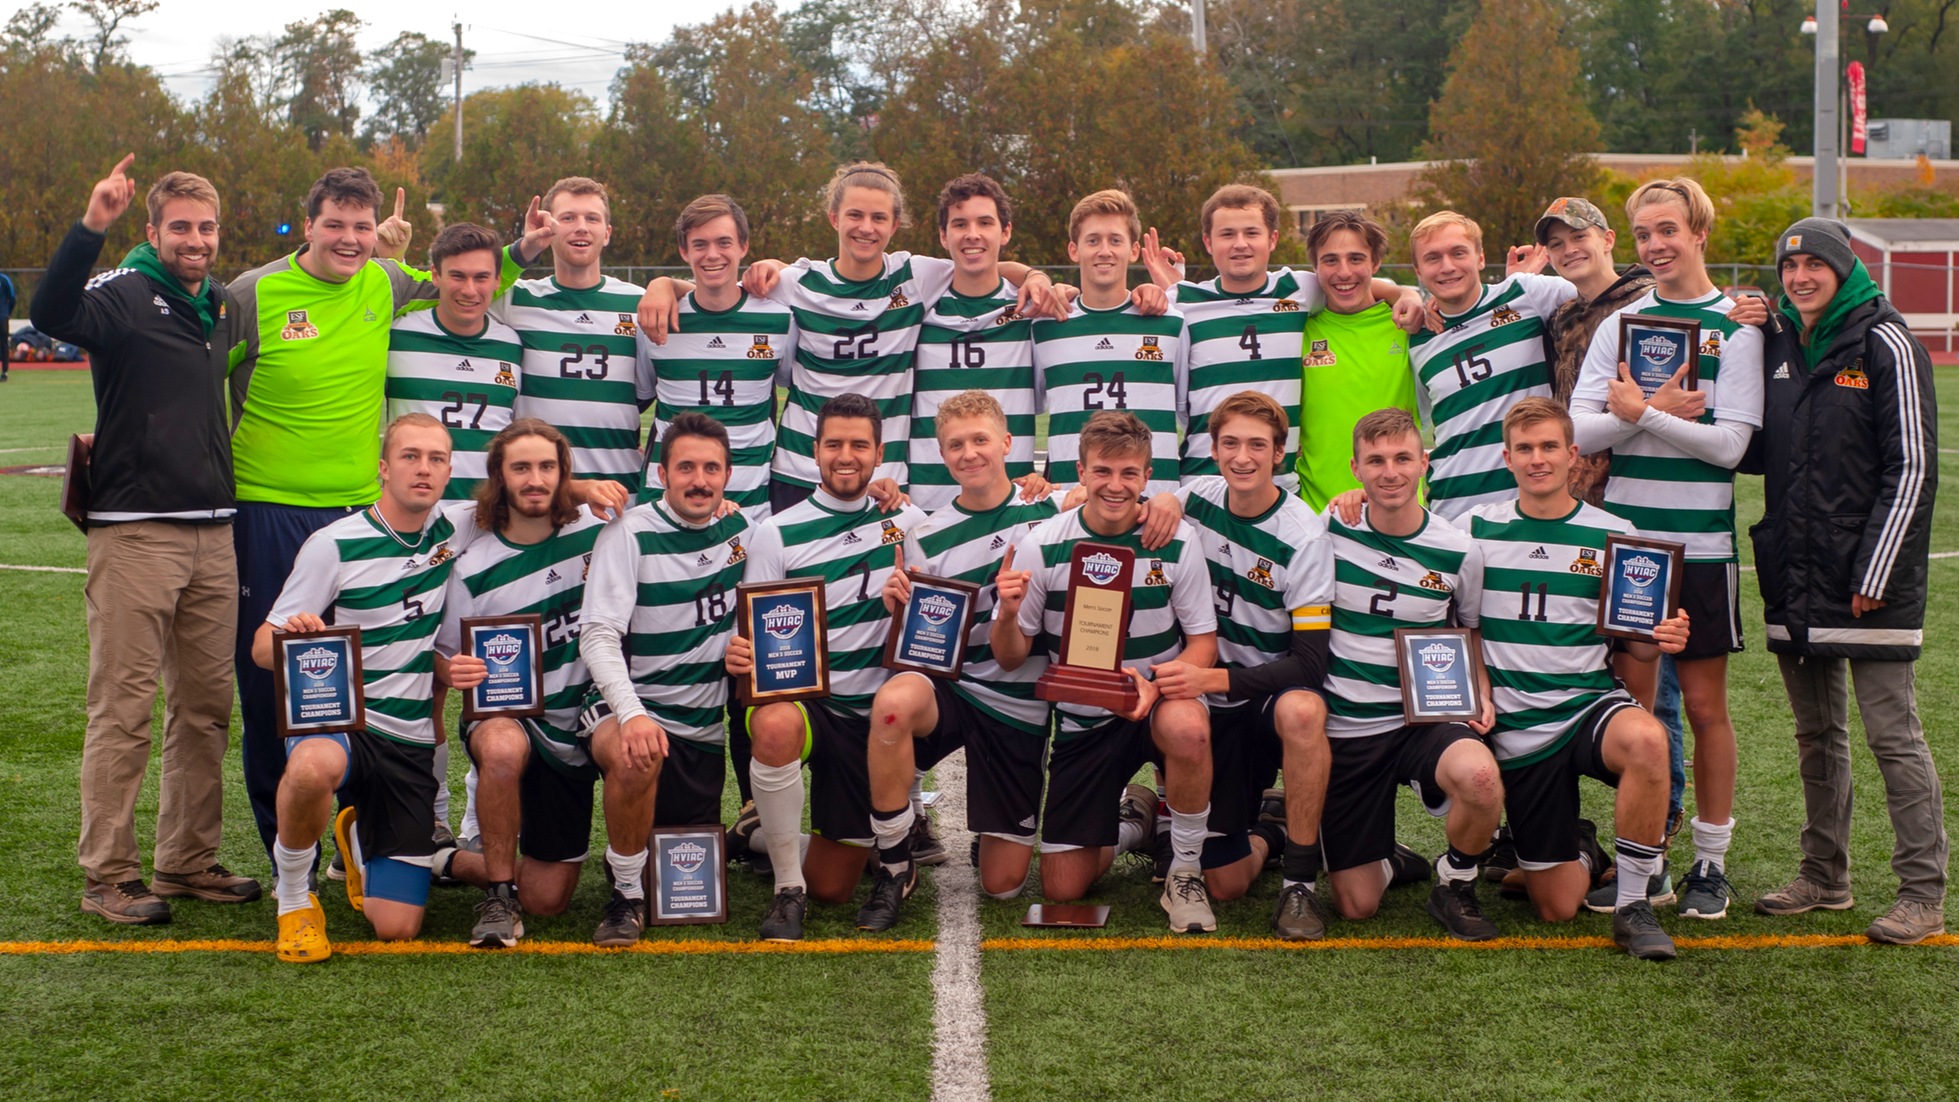 SUNY ESF Rallies to Win Second Men's Soccer Championship in Three Years